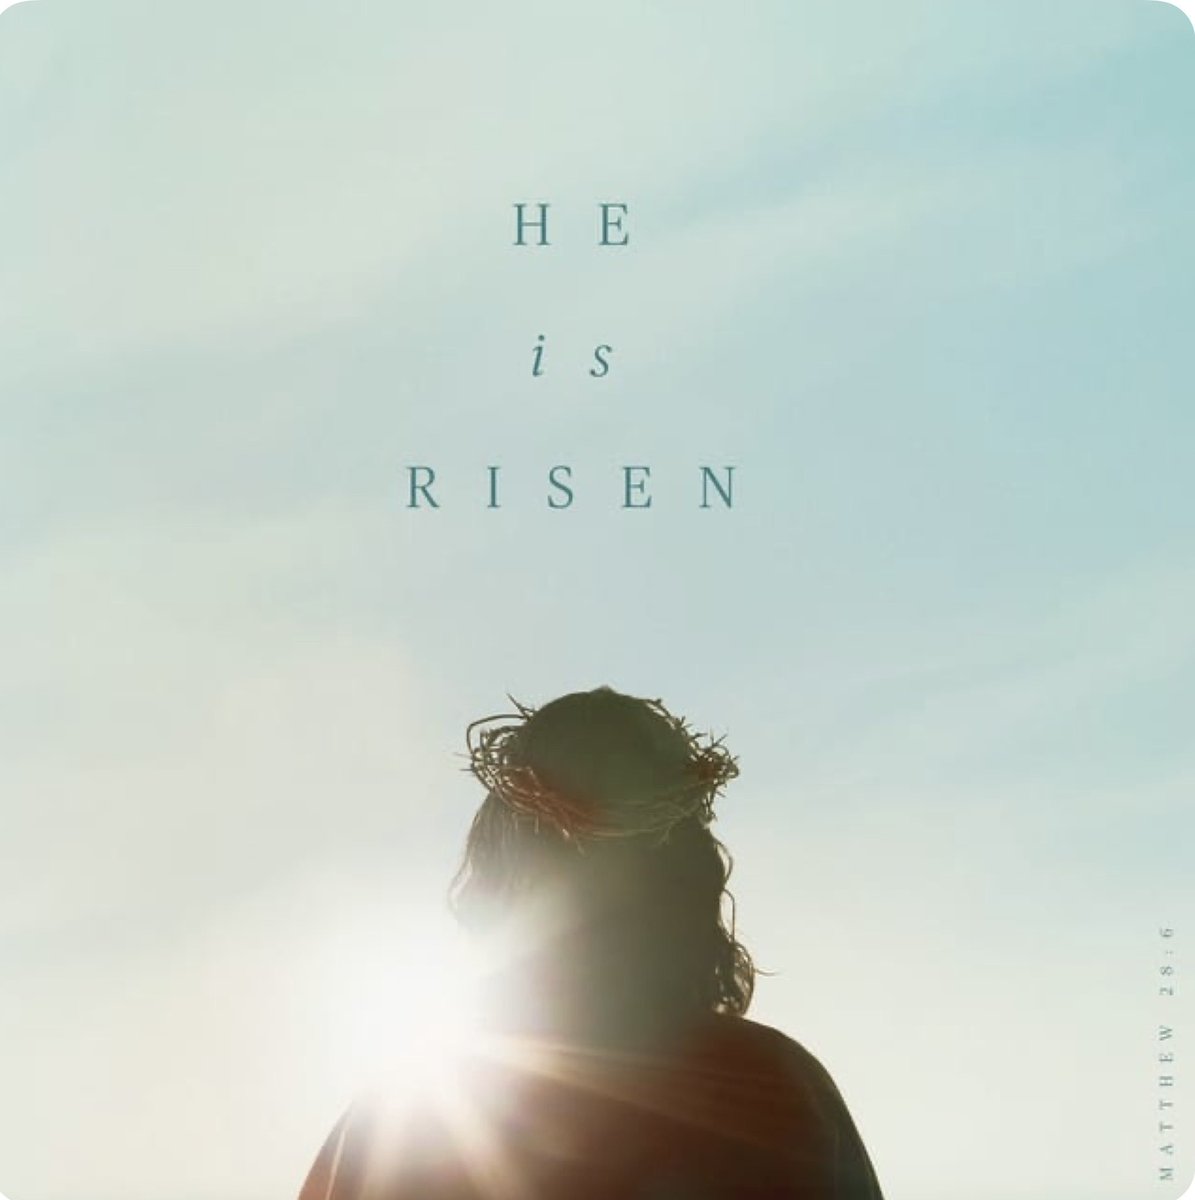 Happy Easter everyone! HE IS RISEN!!